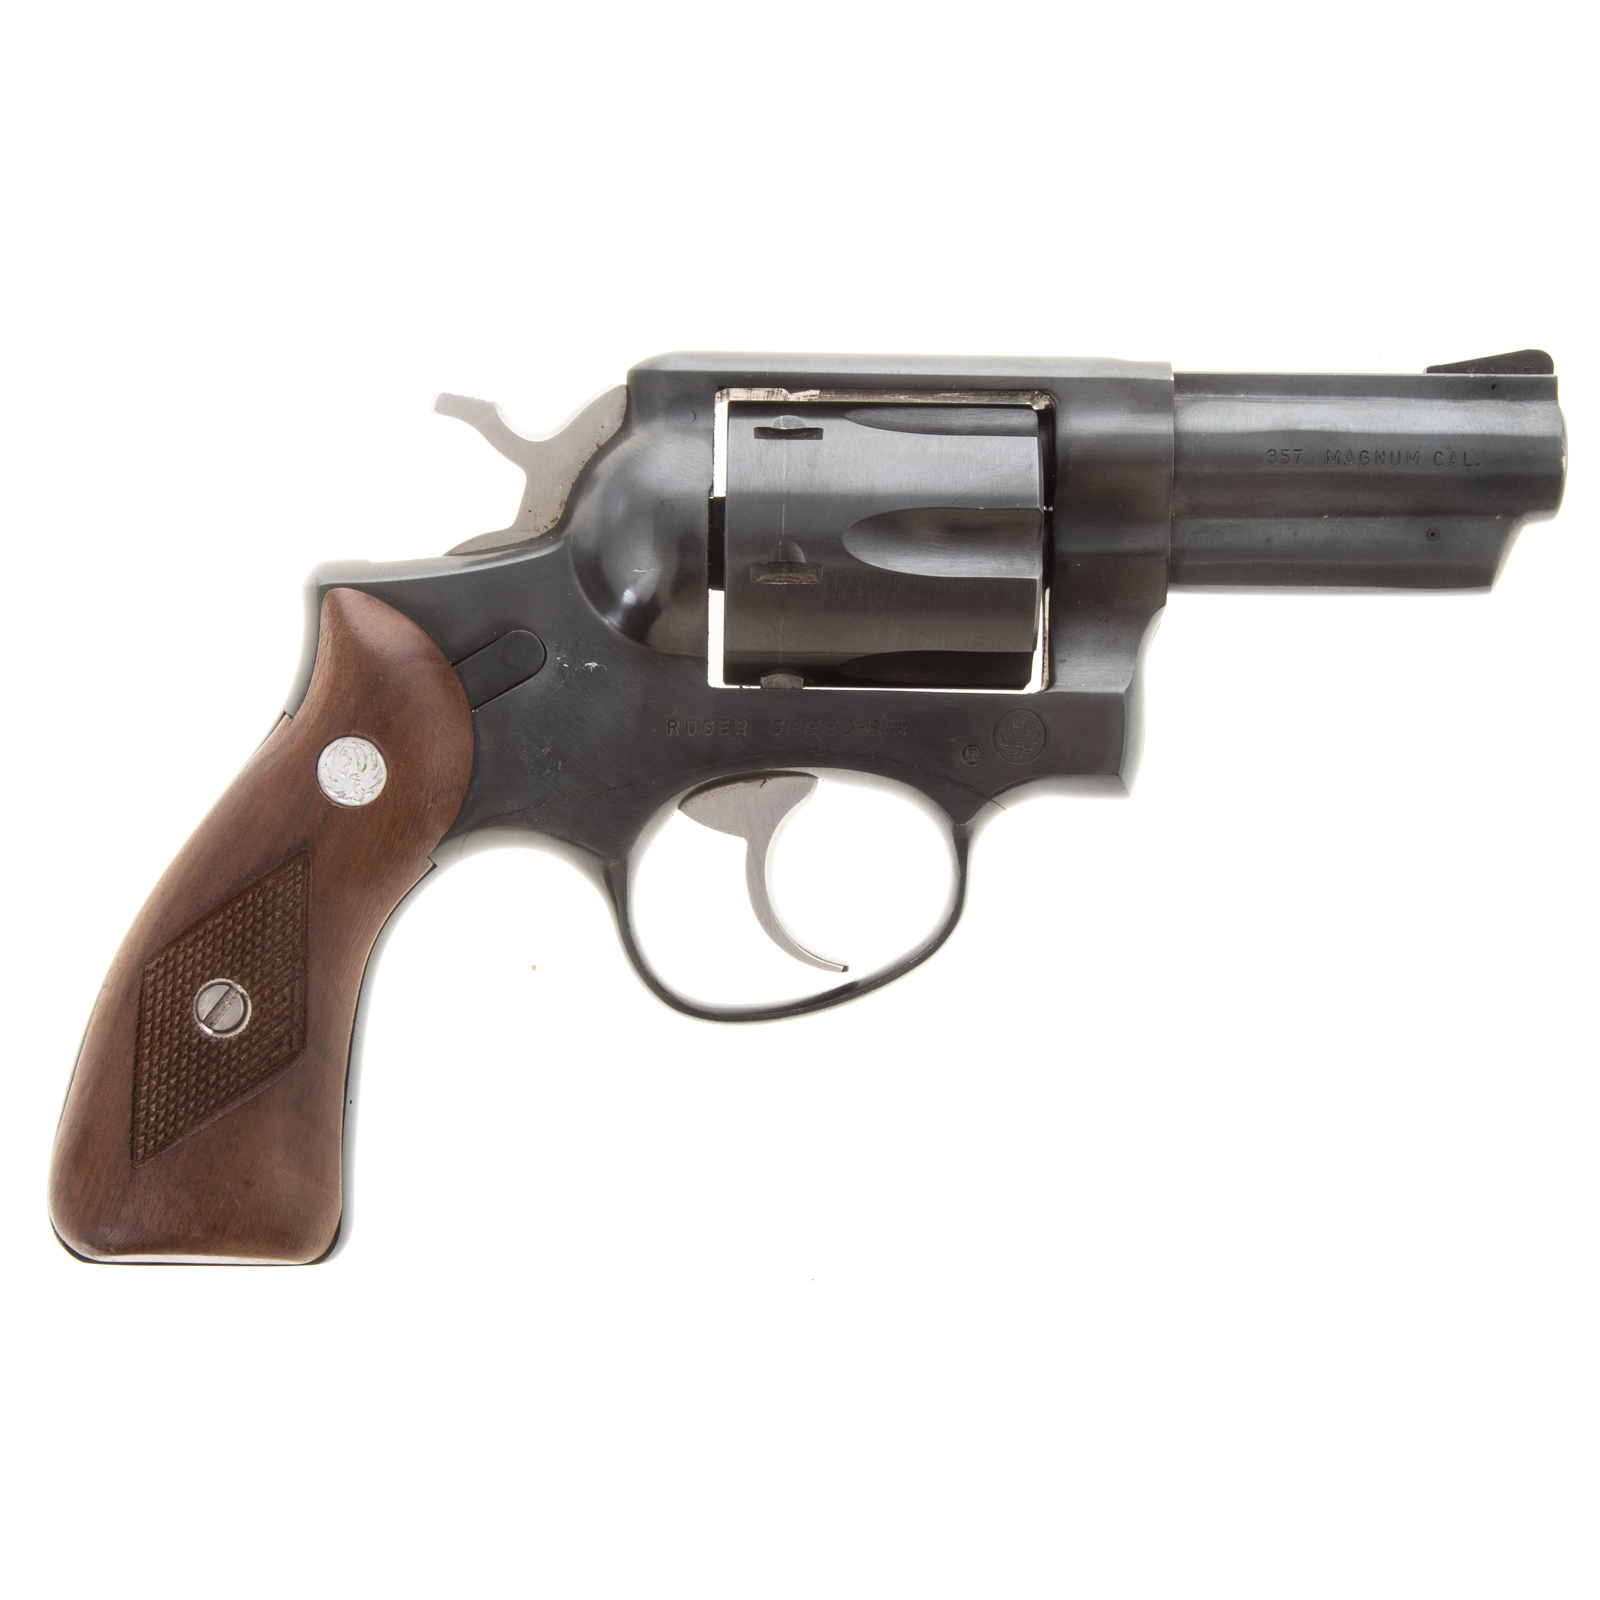 RUGER SPEED SIX DOUBLE ACTION REVOLVER 33547f